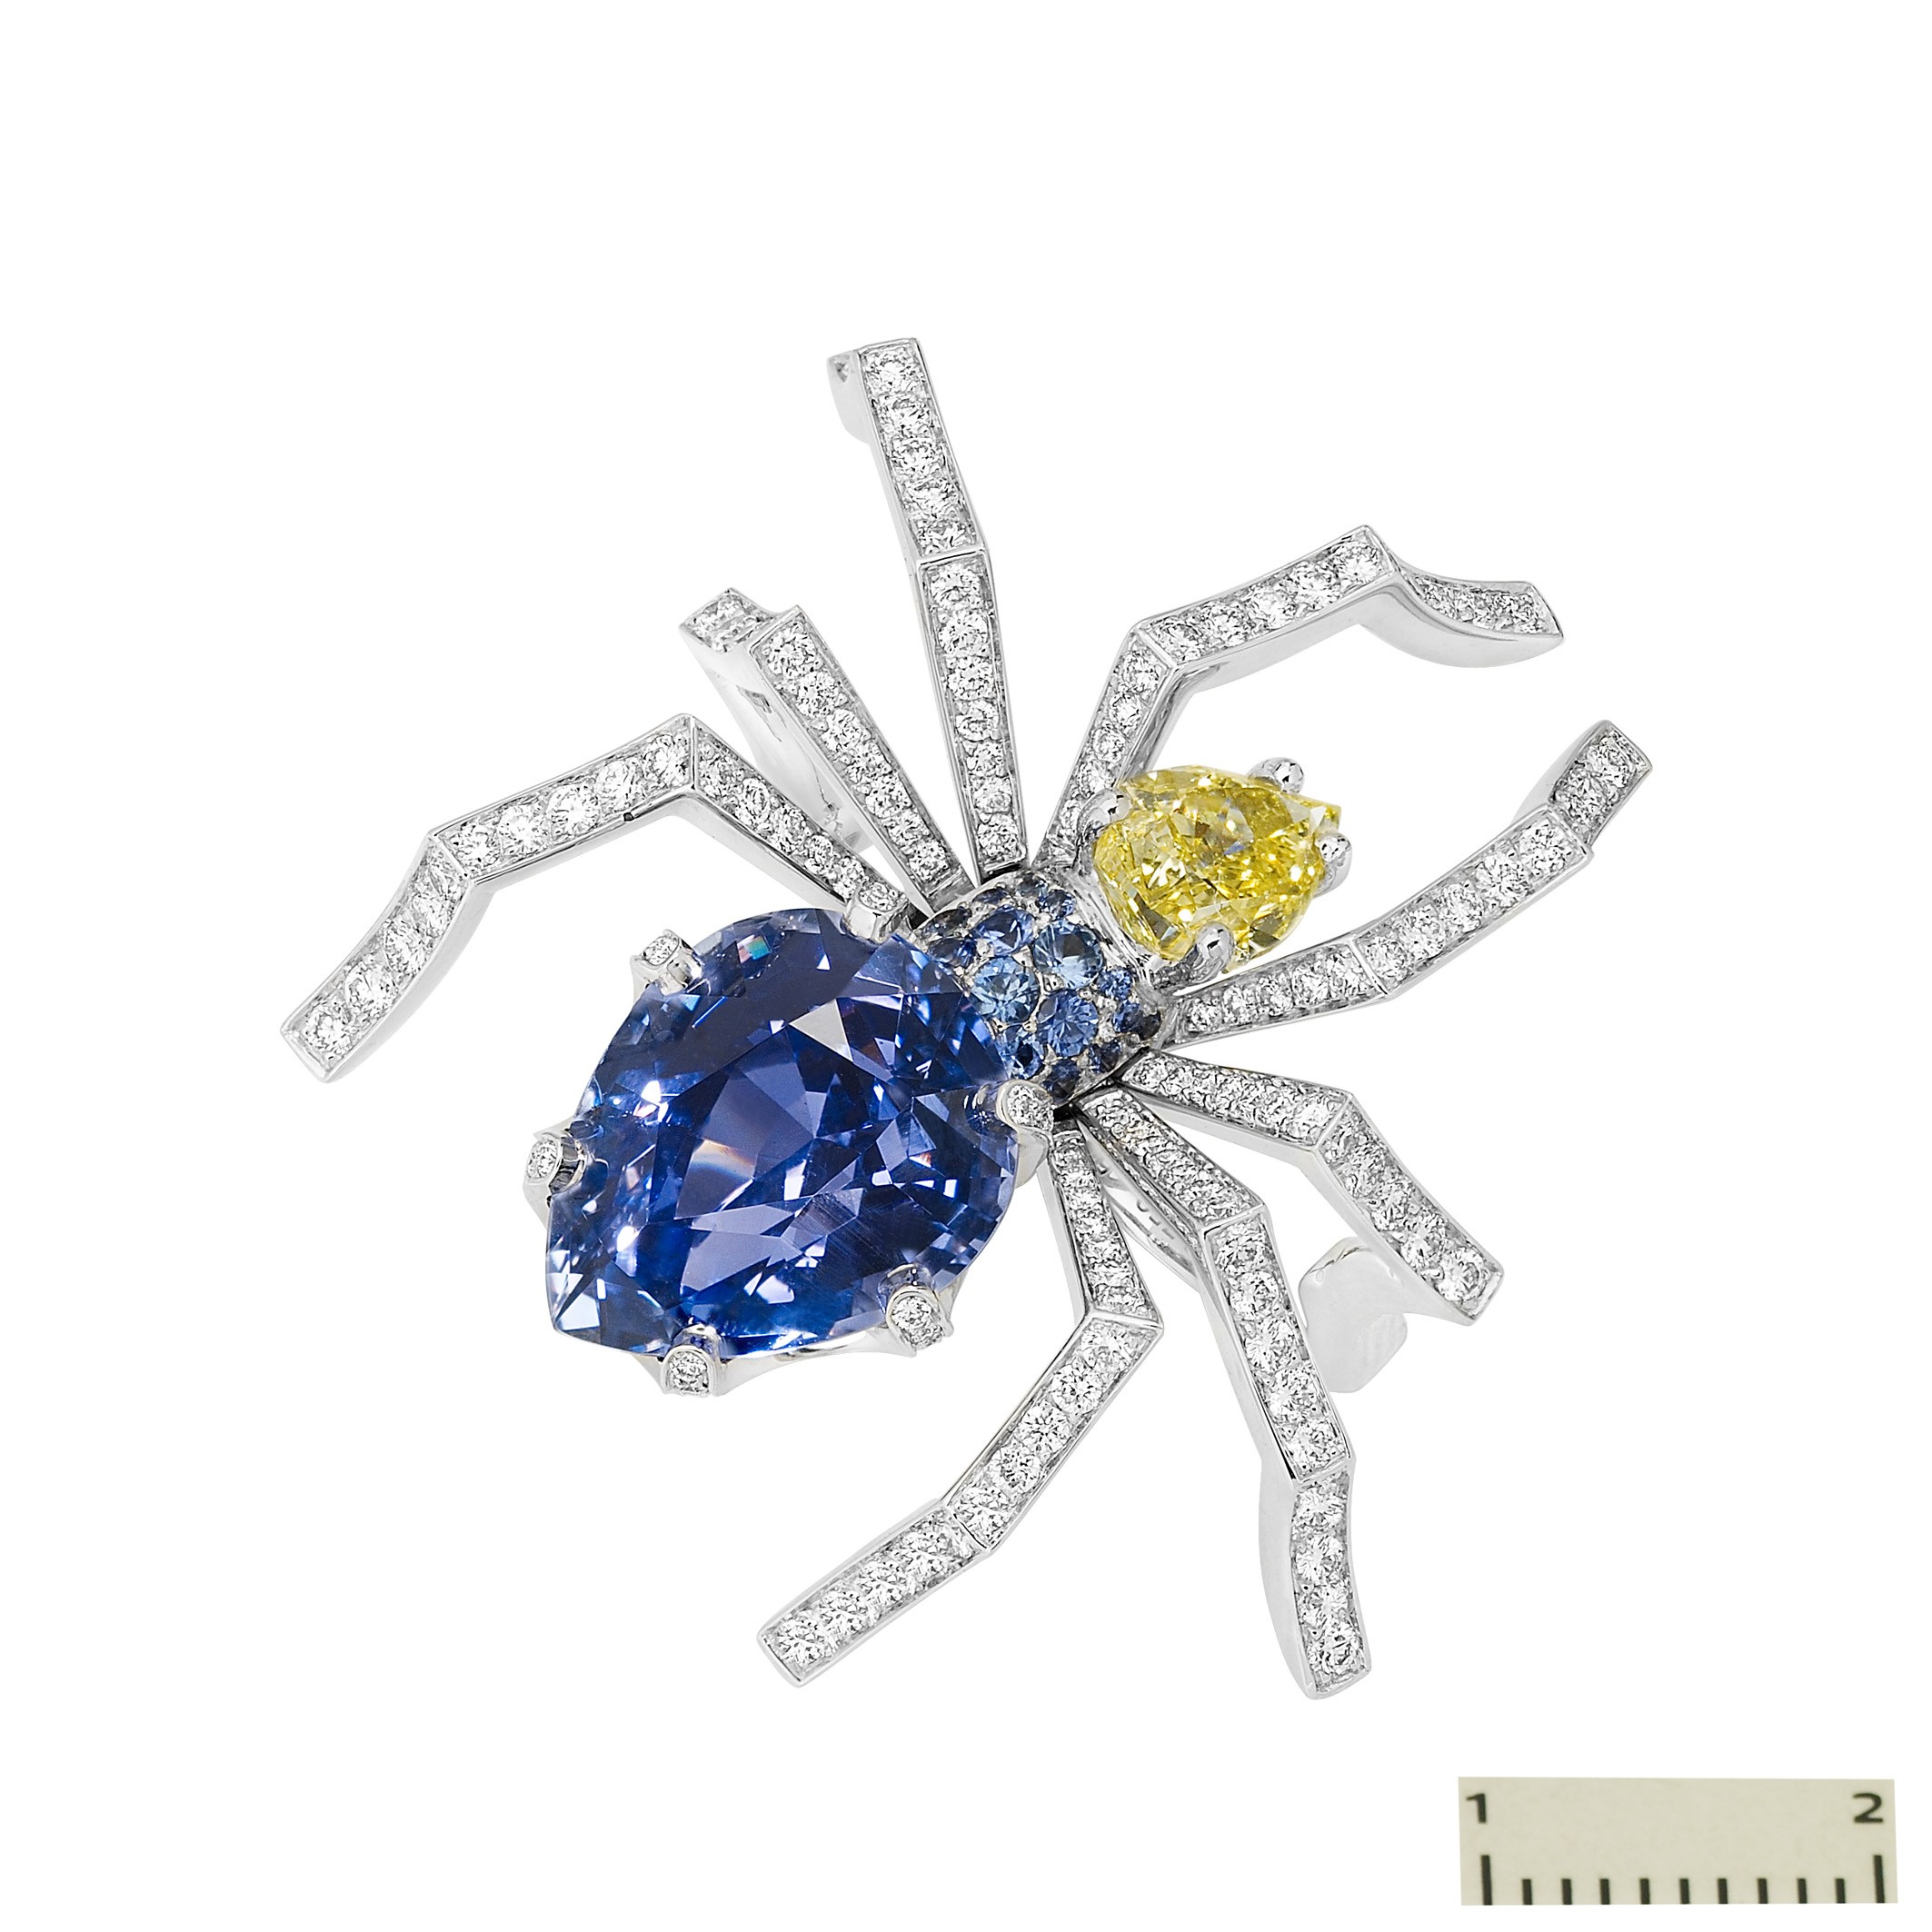 Chaumet. The Attrape-moi … si tu m’aimes spider ring, in 18ct white gold, is set with blue sapphires, yellow diamonds and diamonds, adding a sparkling touch to Halloween festivities. Price on request